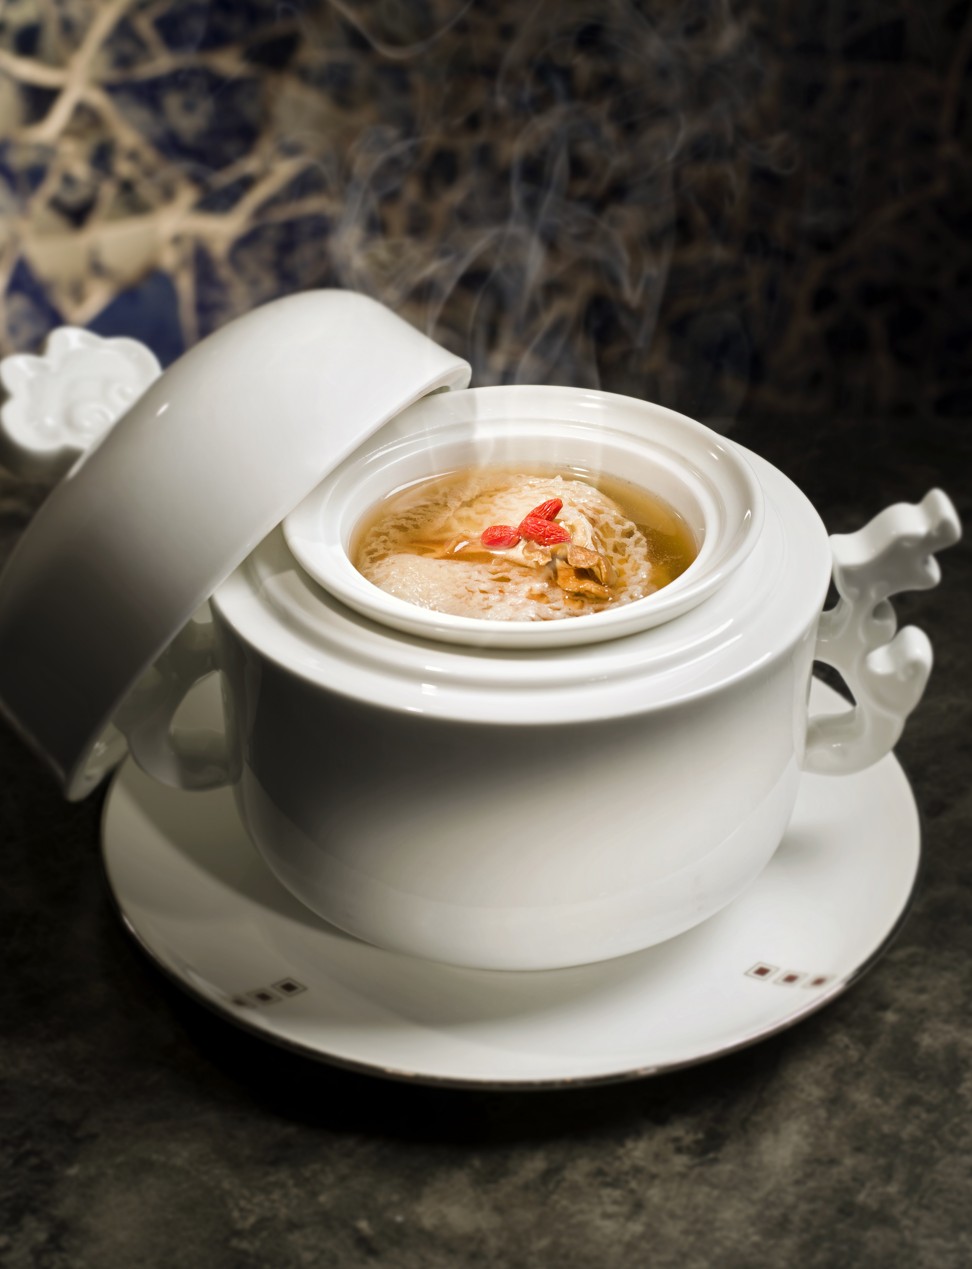 Double-boiled bamboo piths with maitake mushroom and Chinese herbs at Lai Heen, in the Ritz-Carlton, Macau.